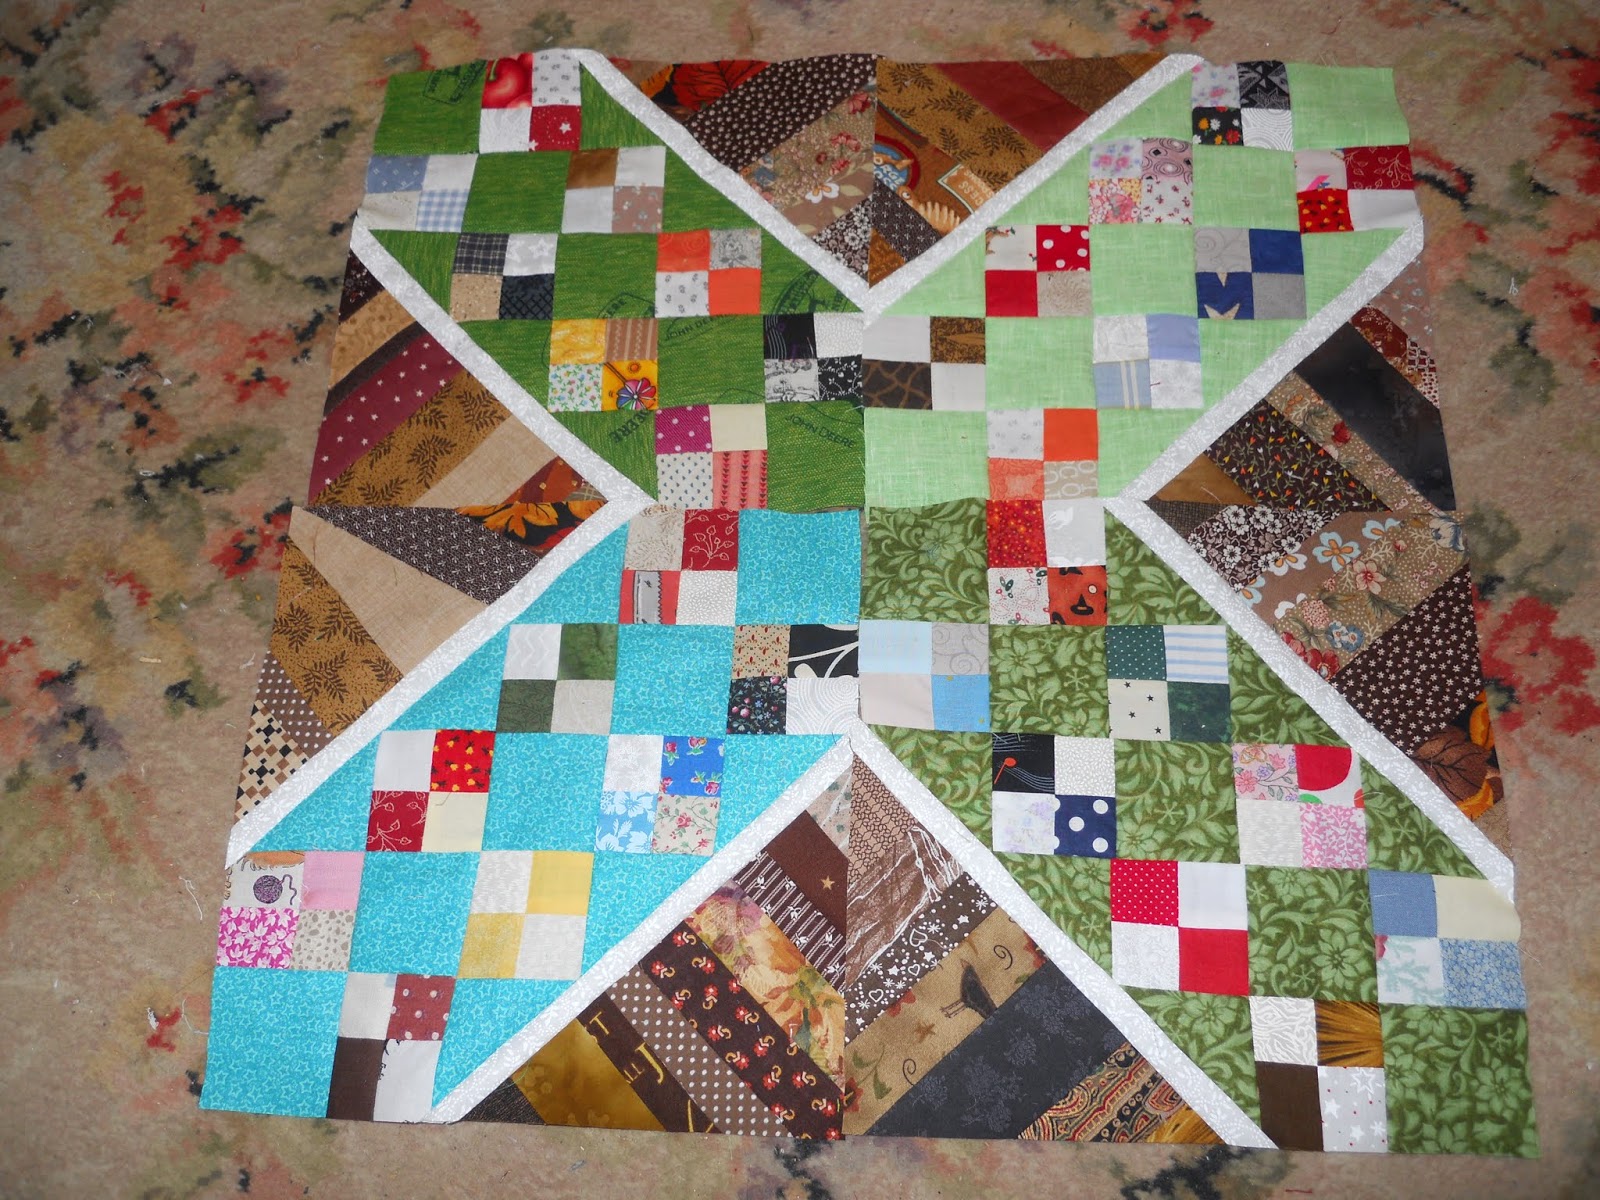 Kathy's Quilting Blog: Green Sand Castle Blocks and RSC19